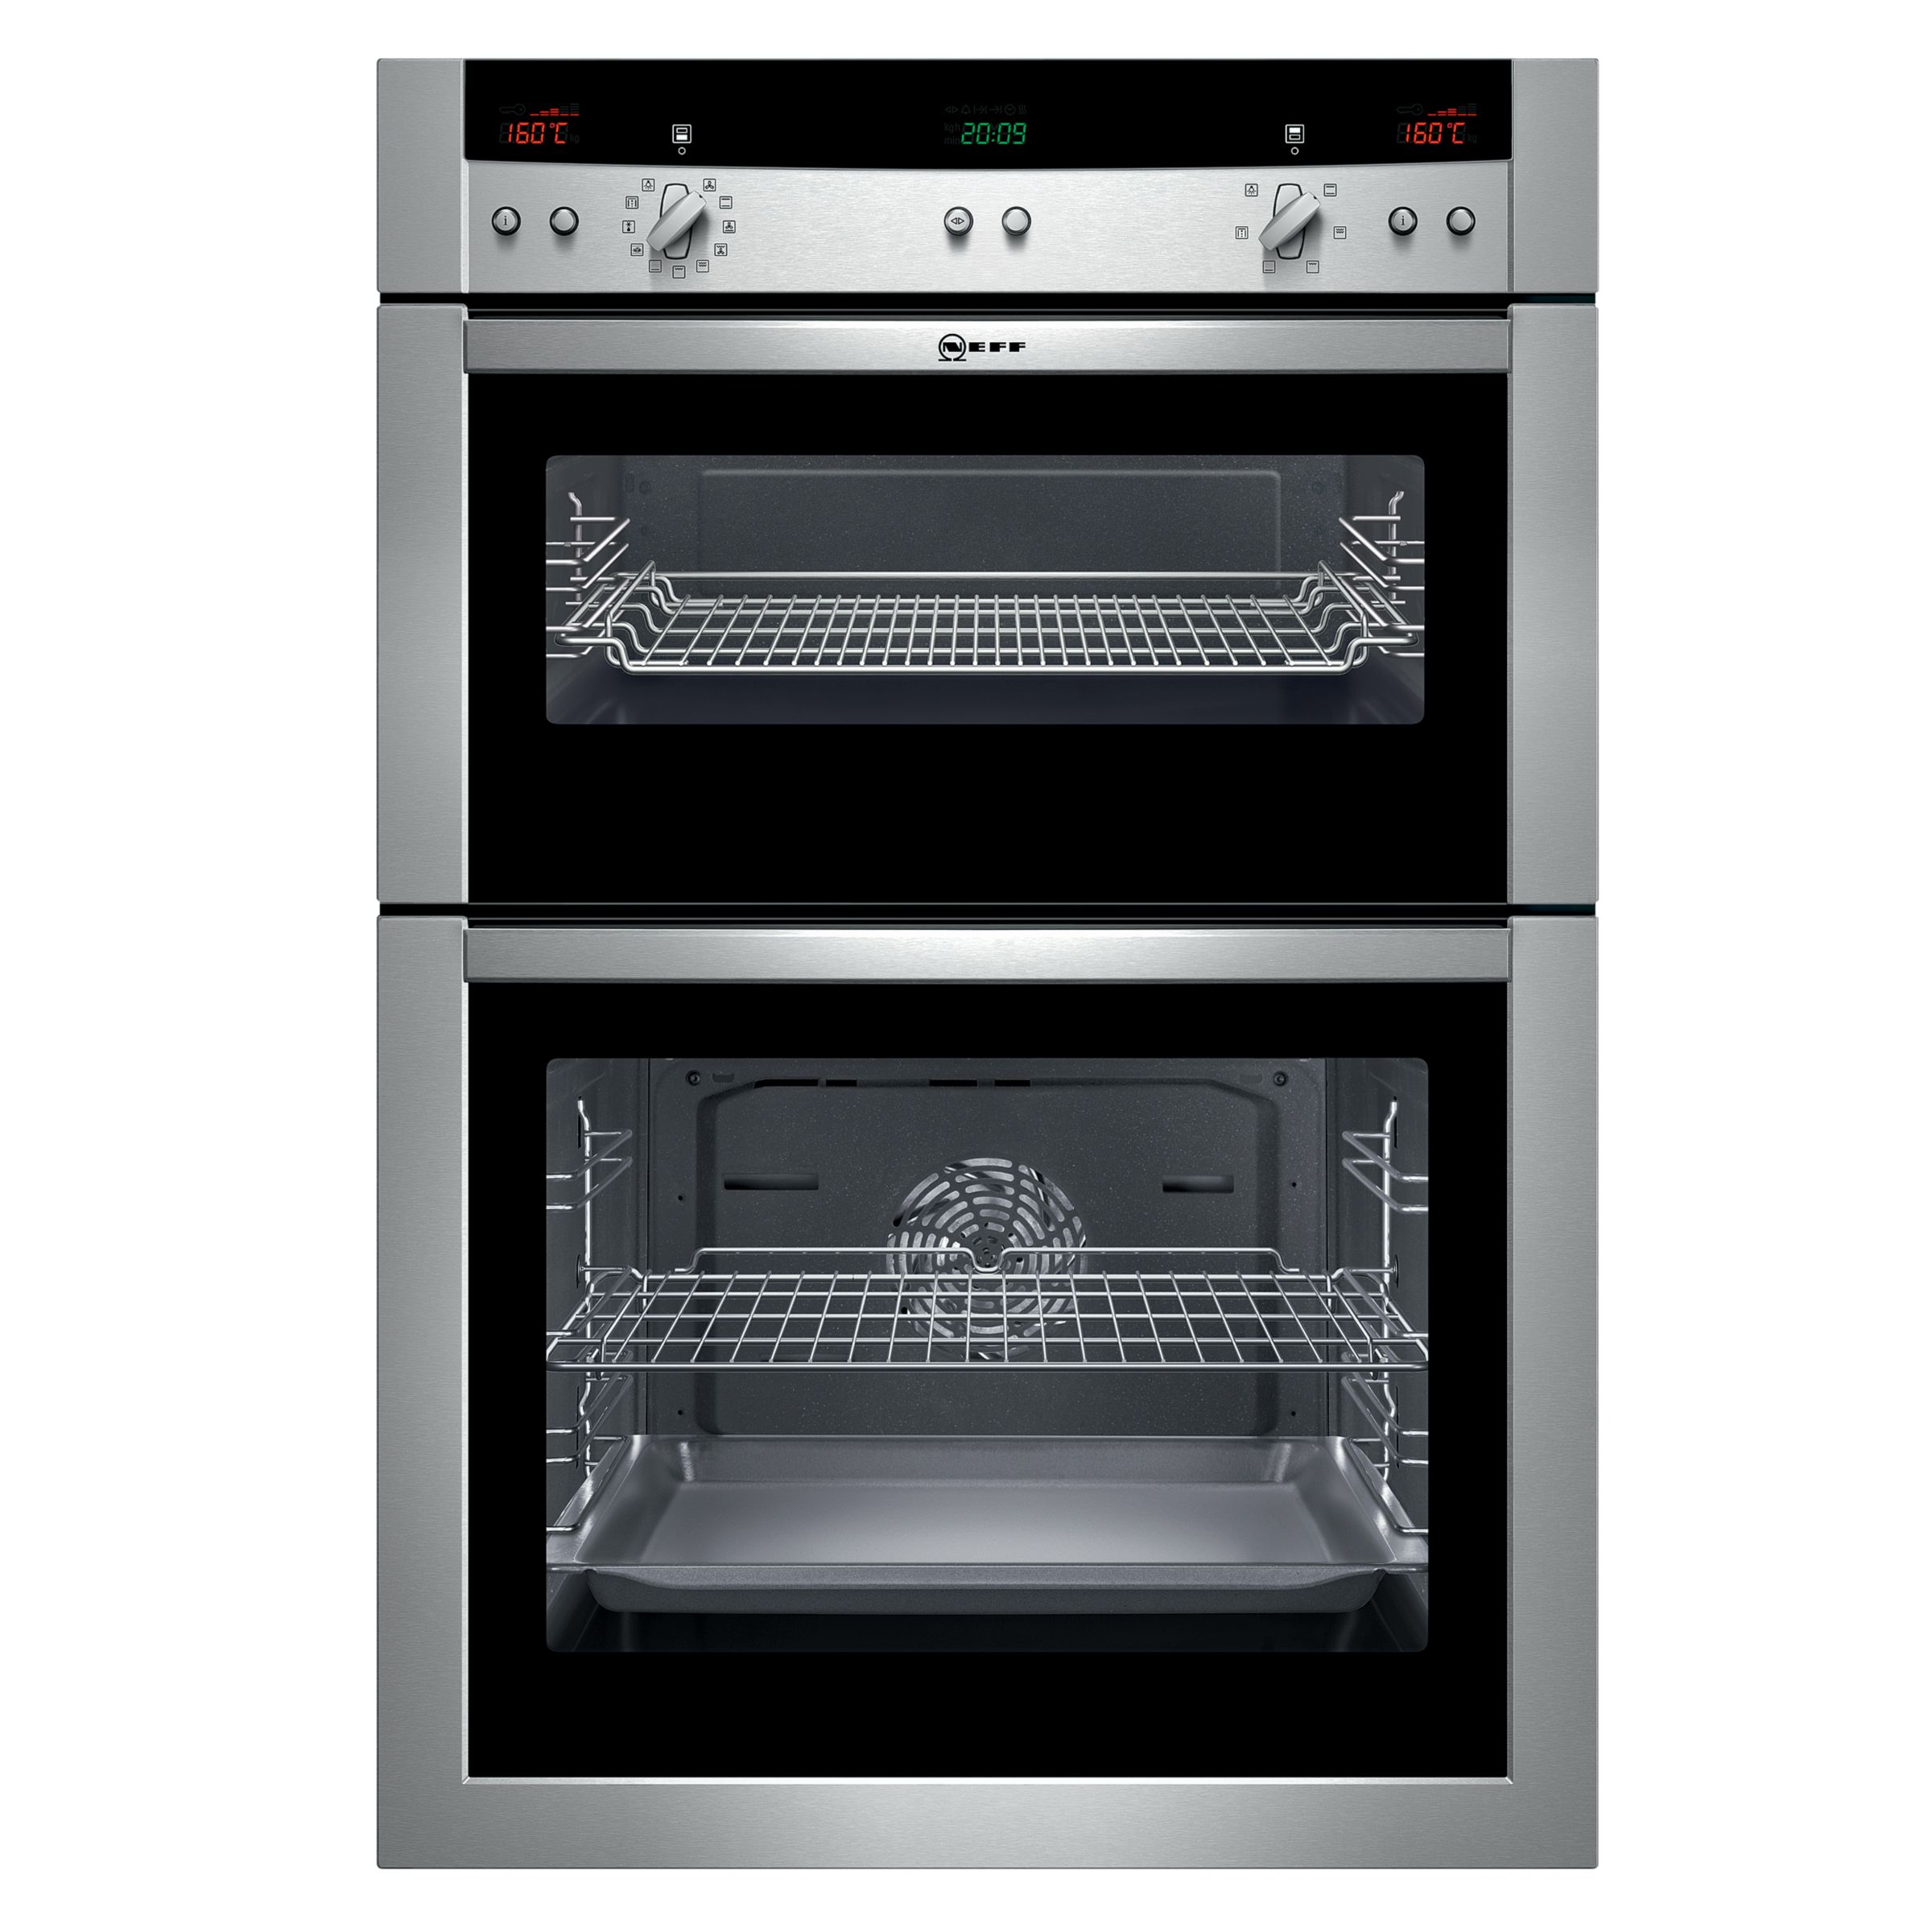 Neff U15E42N0GB Double Electric Oven, Stainless Steel at John Lewis